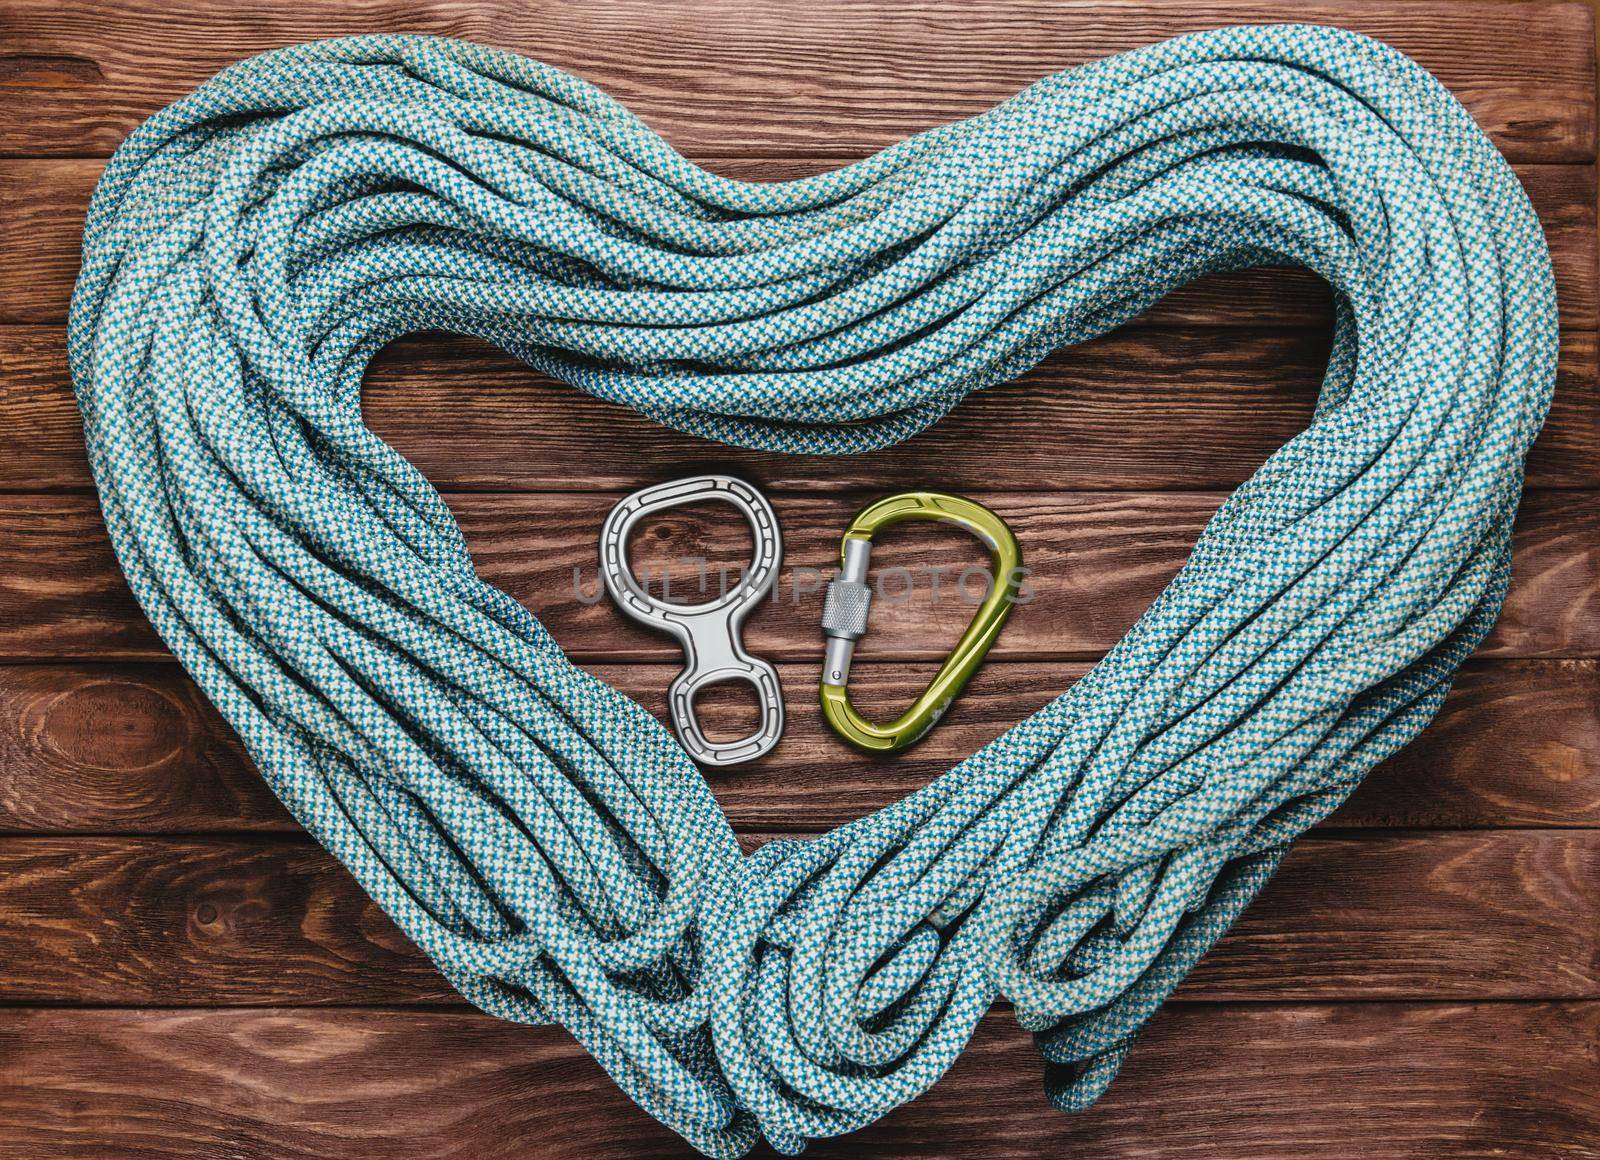 Rope for climbing in the shape of a heart with carbine and figure eight on wooden background, top view.